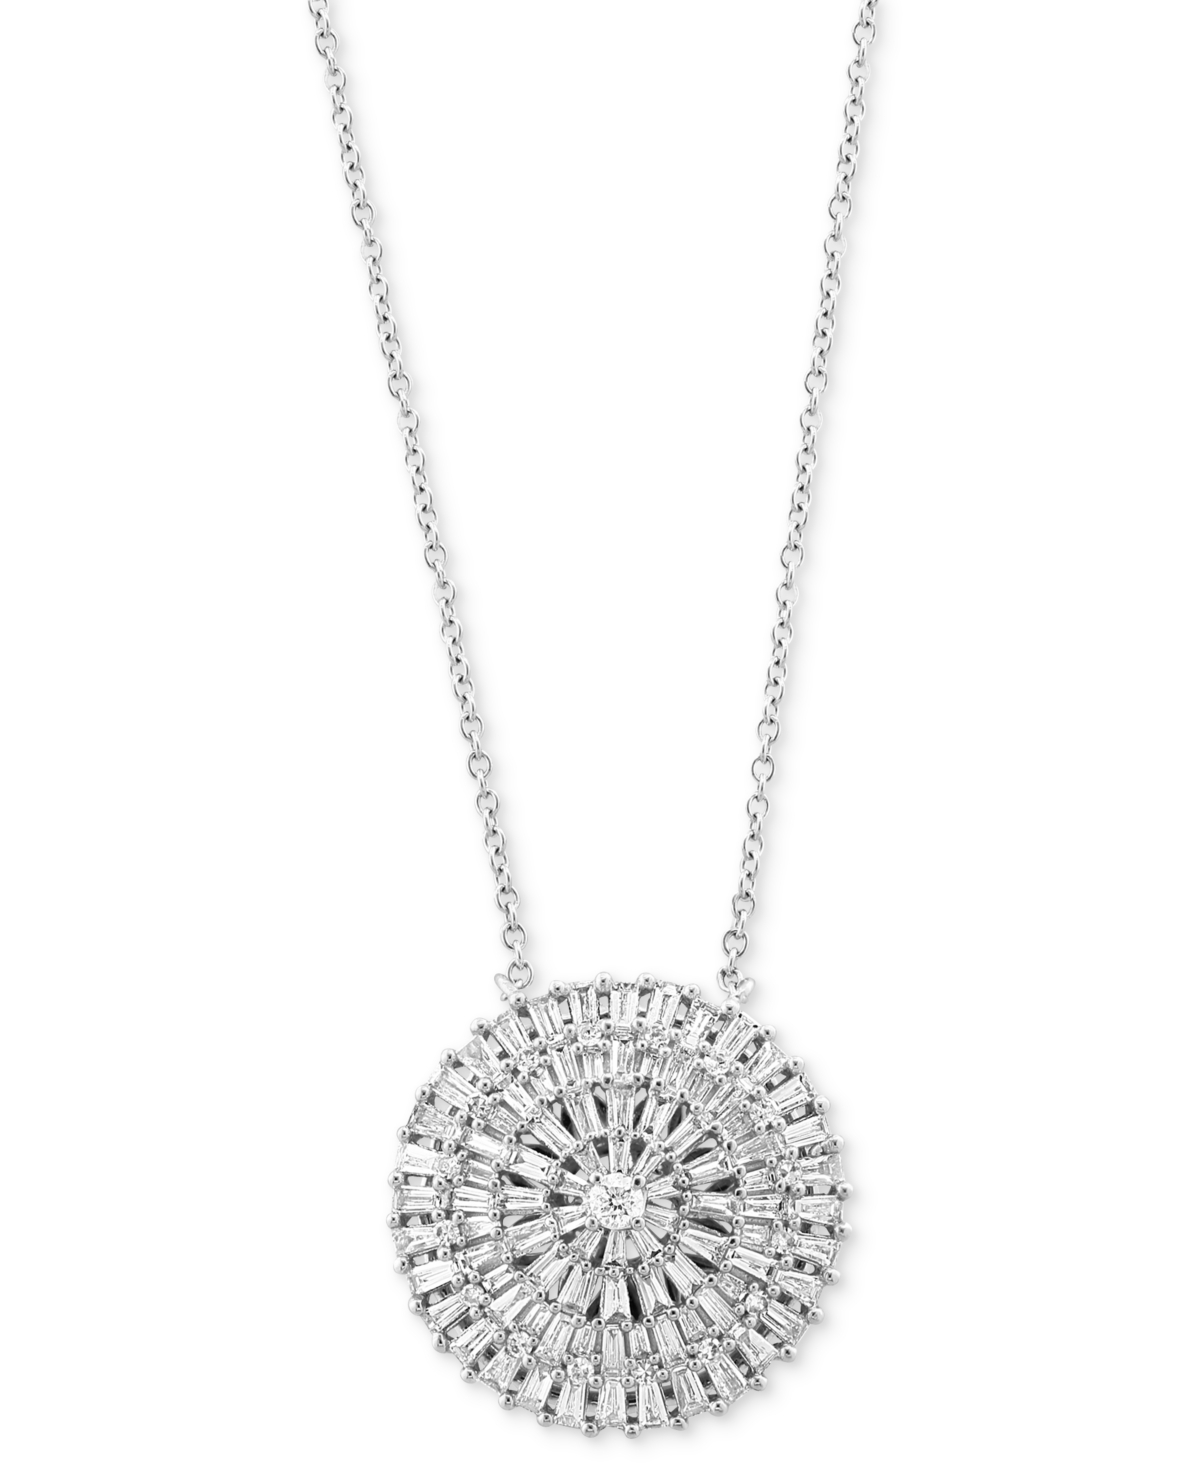 Effy Diamond Round & Baguette Circle Cluster 18" Pendant Necklace (1 ct. t.w.) in 14k White Gold - White Gold